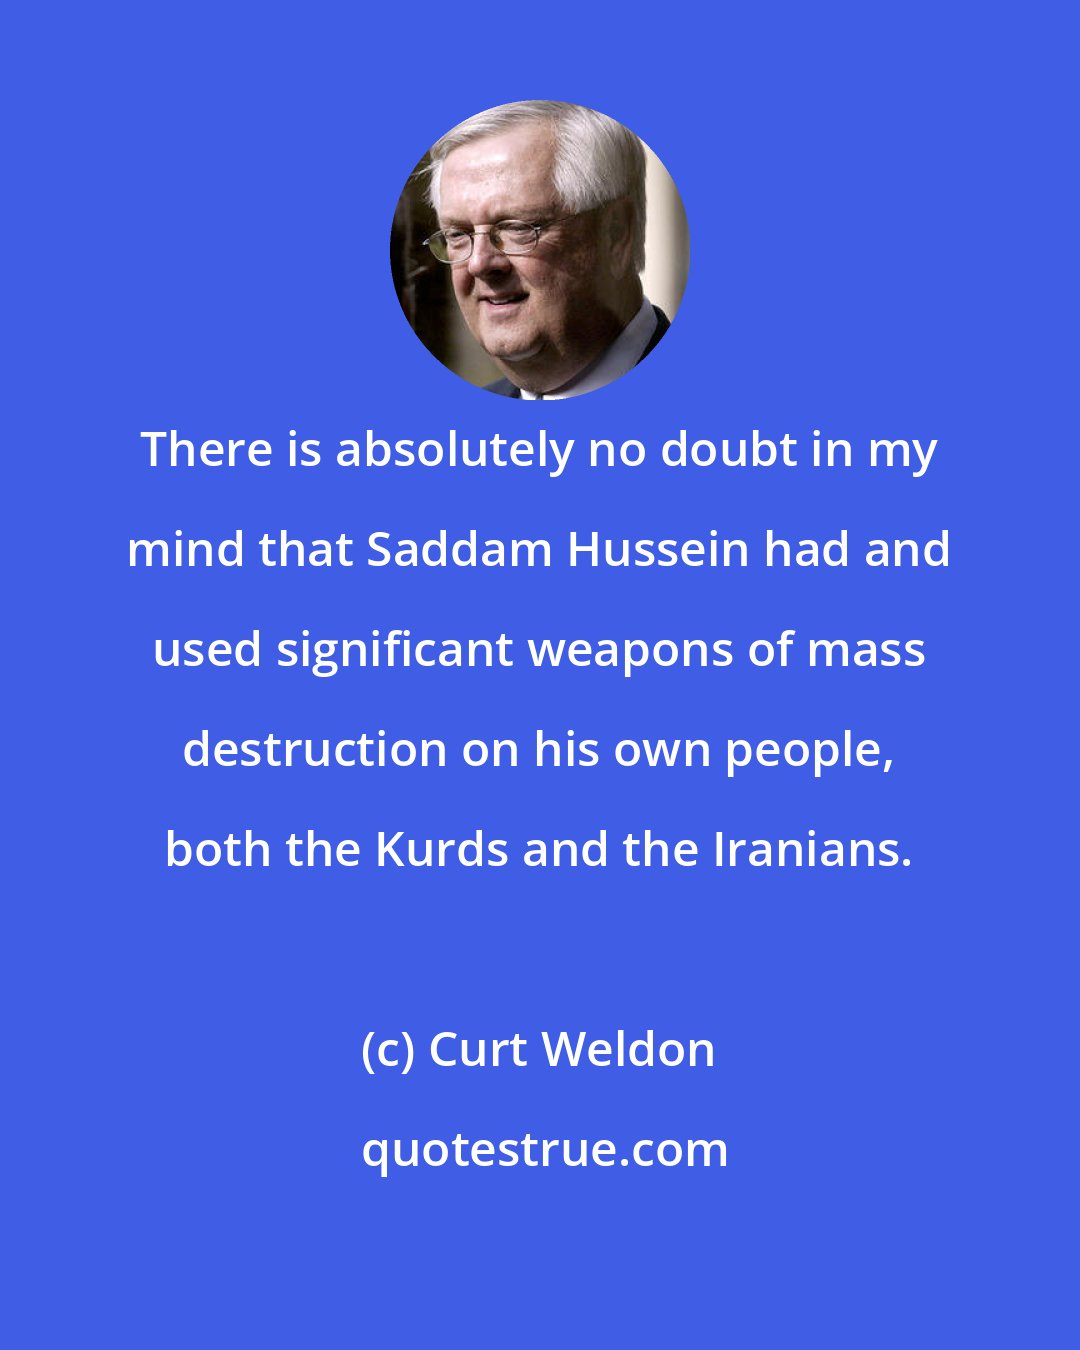 Curt Weldon: There is absolutely no doubt in my mind that Saddam Hussein had and used significant weapons of mass destruction on his own people, both the Kurds and the Iranians.